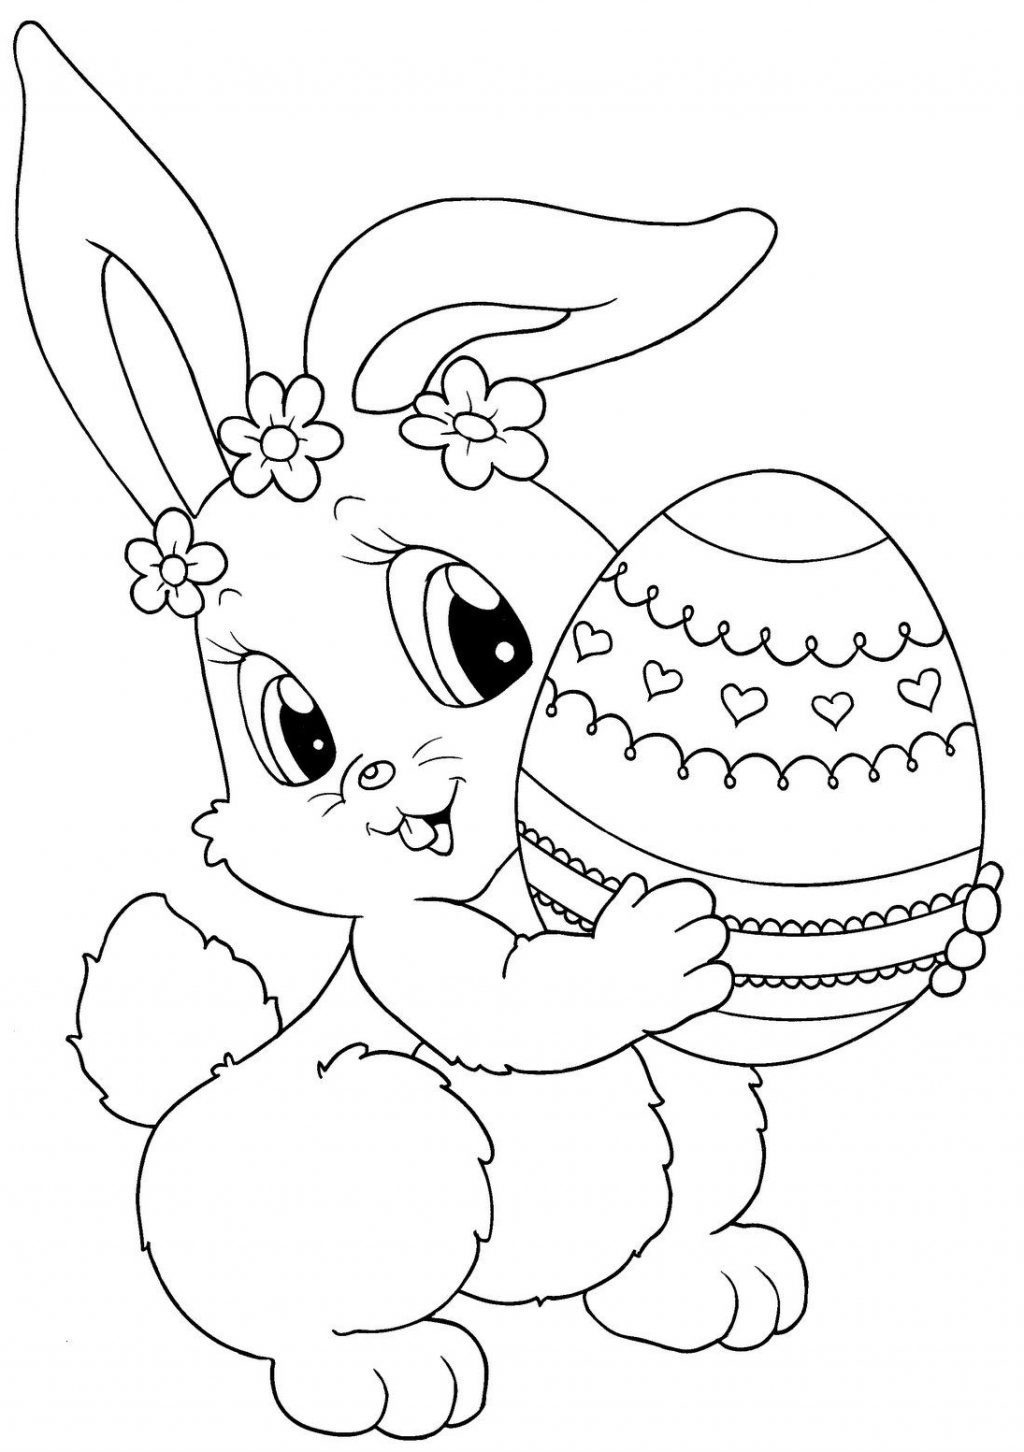 coloring-pages-ideas-coloring-pages-ideas-hoppyeastercoloringpage-coloring-pages-free